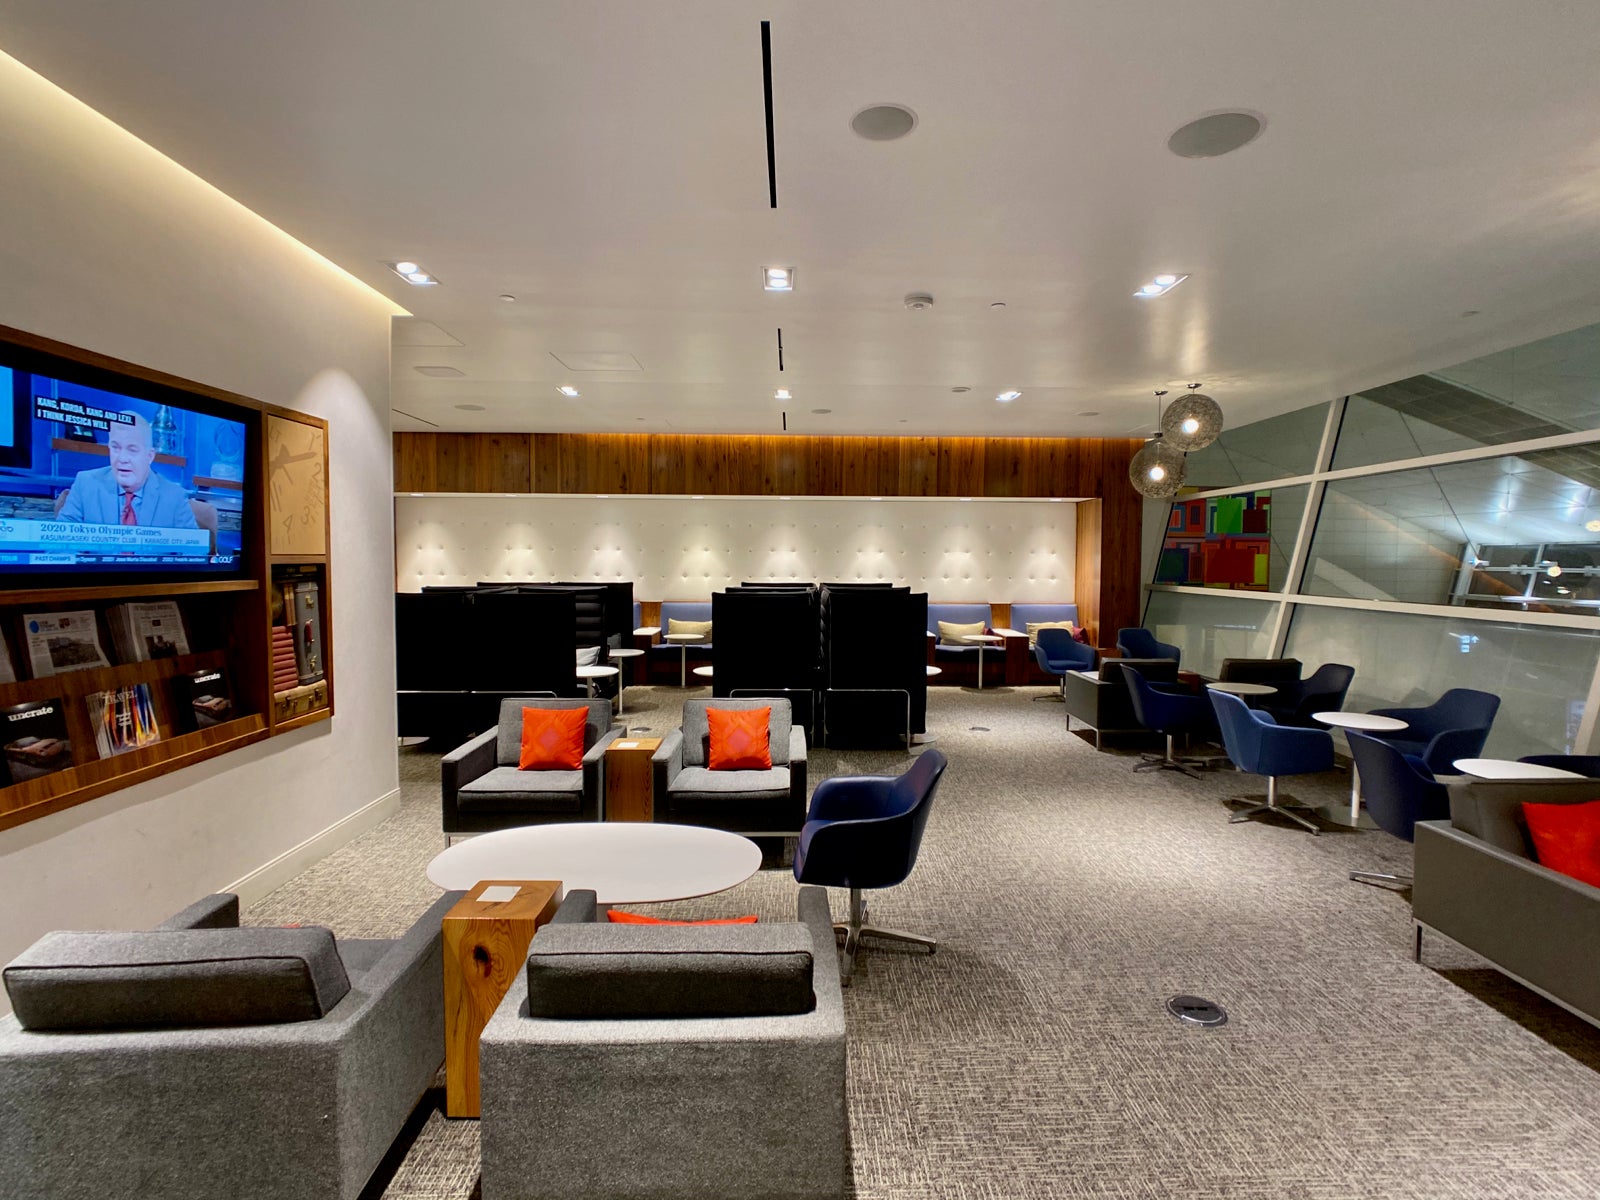 How to Access Capital One Airport Lounges